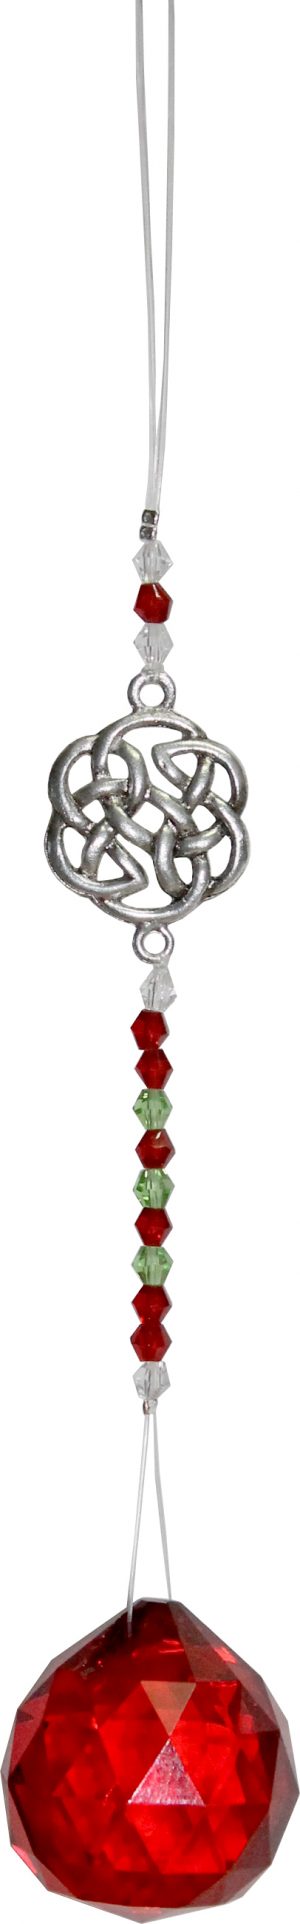 Suspended Crystal Cut Glass with Beads  Celtic Button - Red